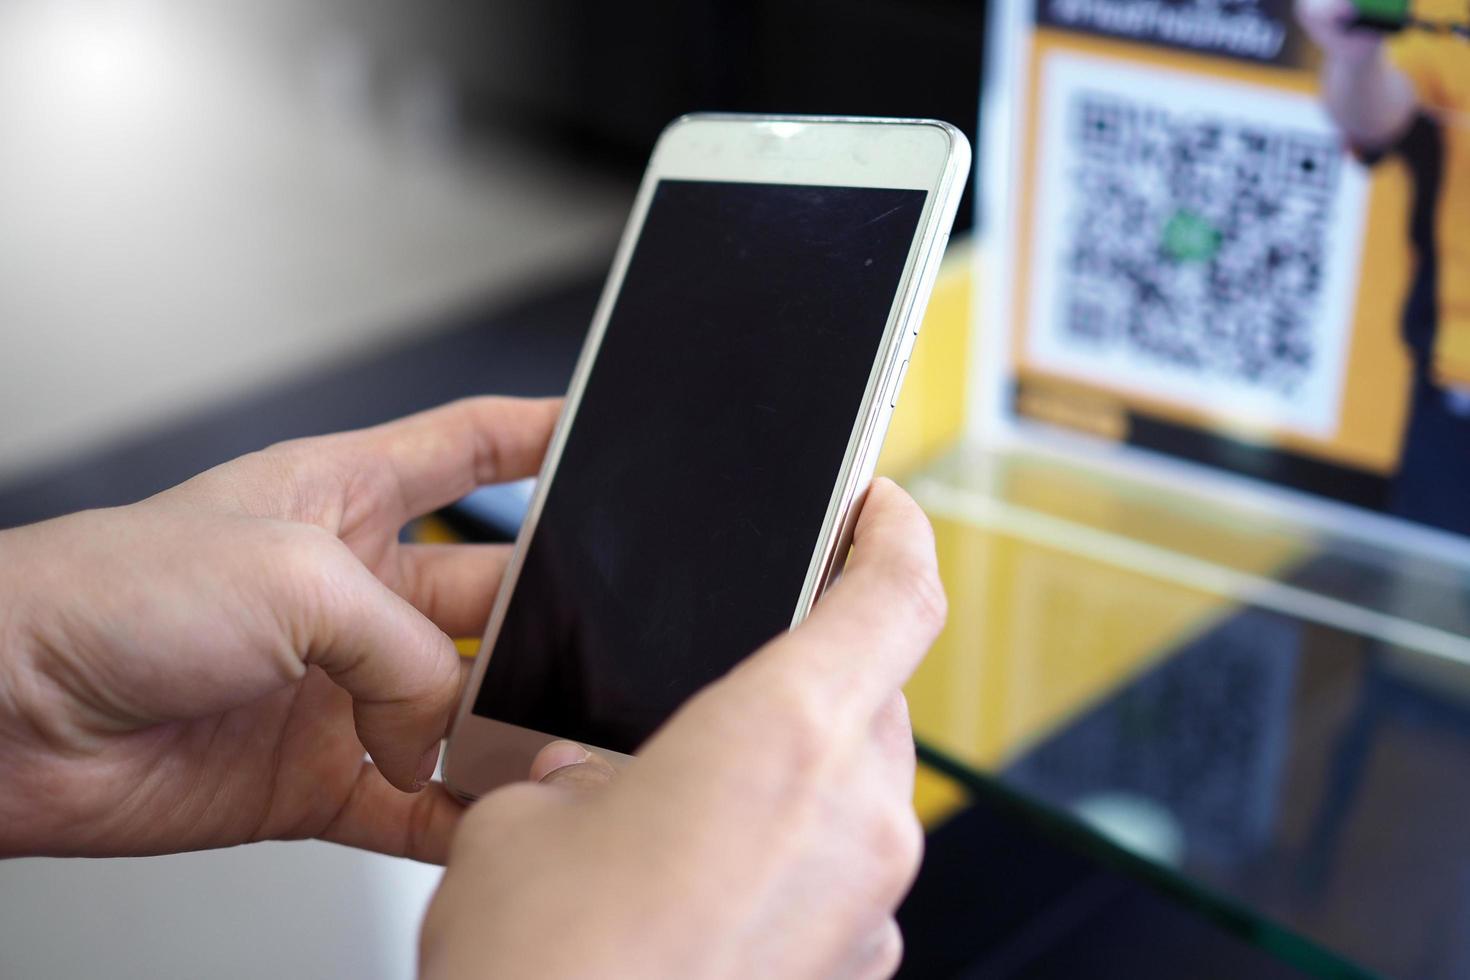 Hands use the phone to scan QR codes to receive discounts on purchases. photo